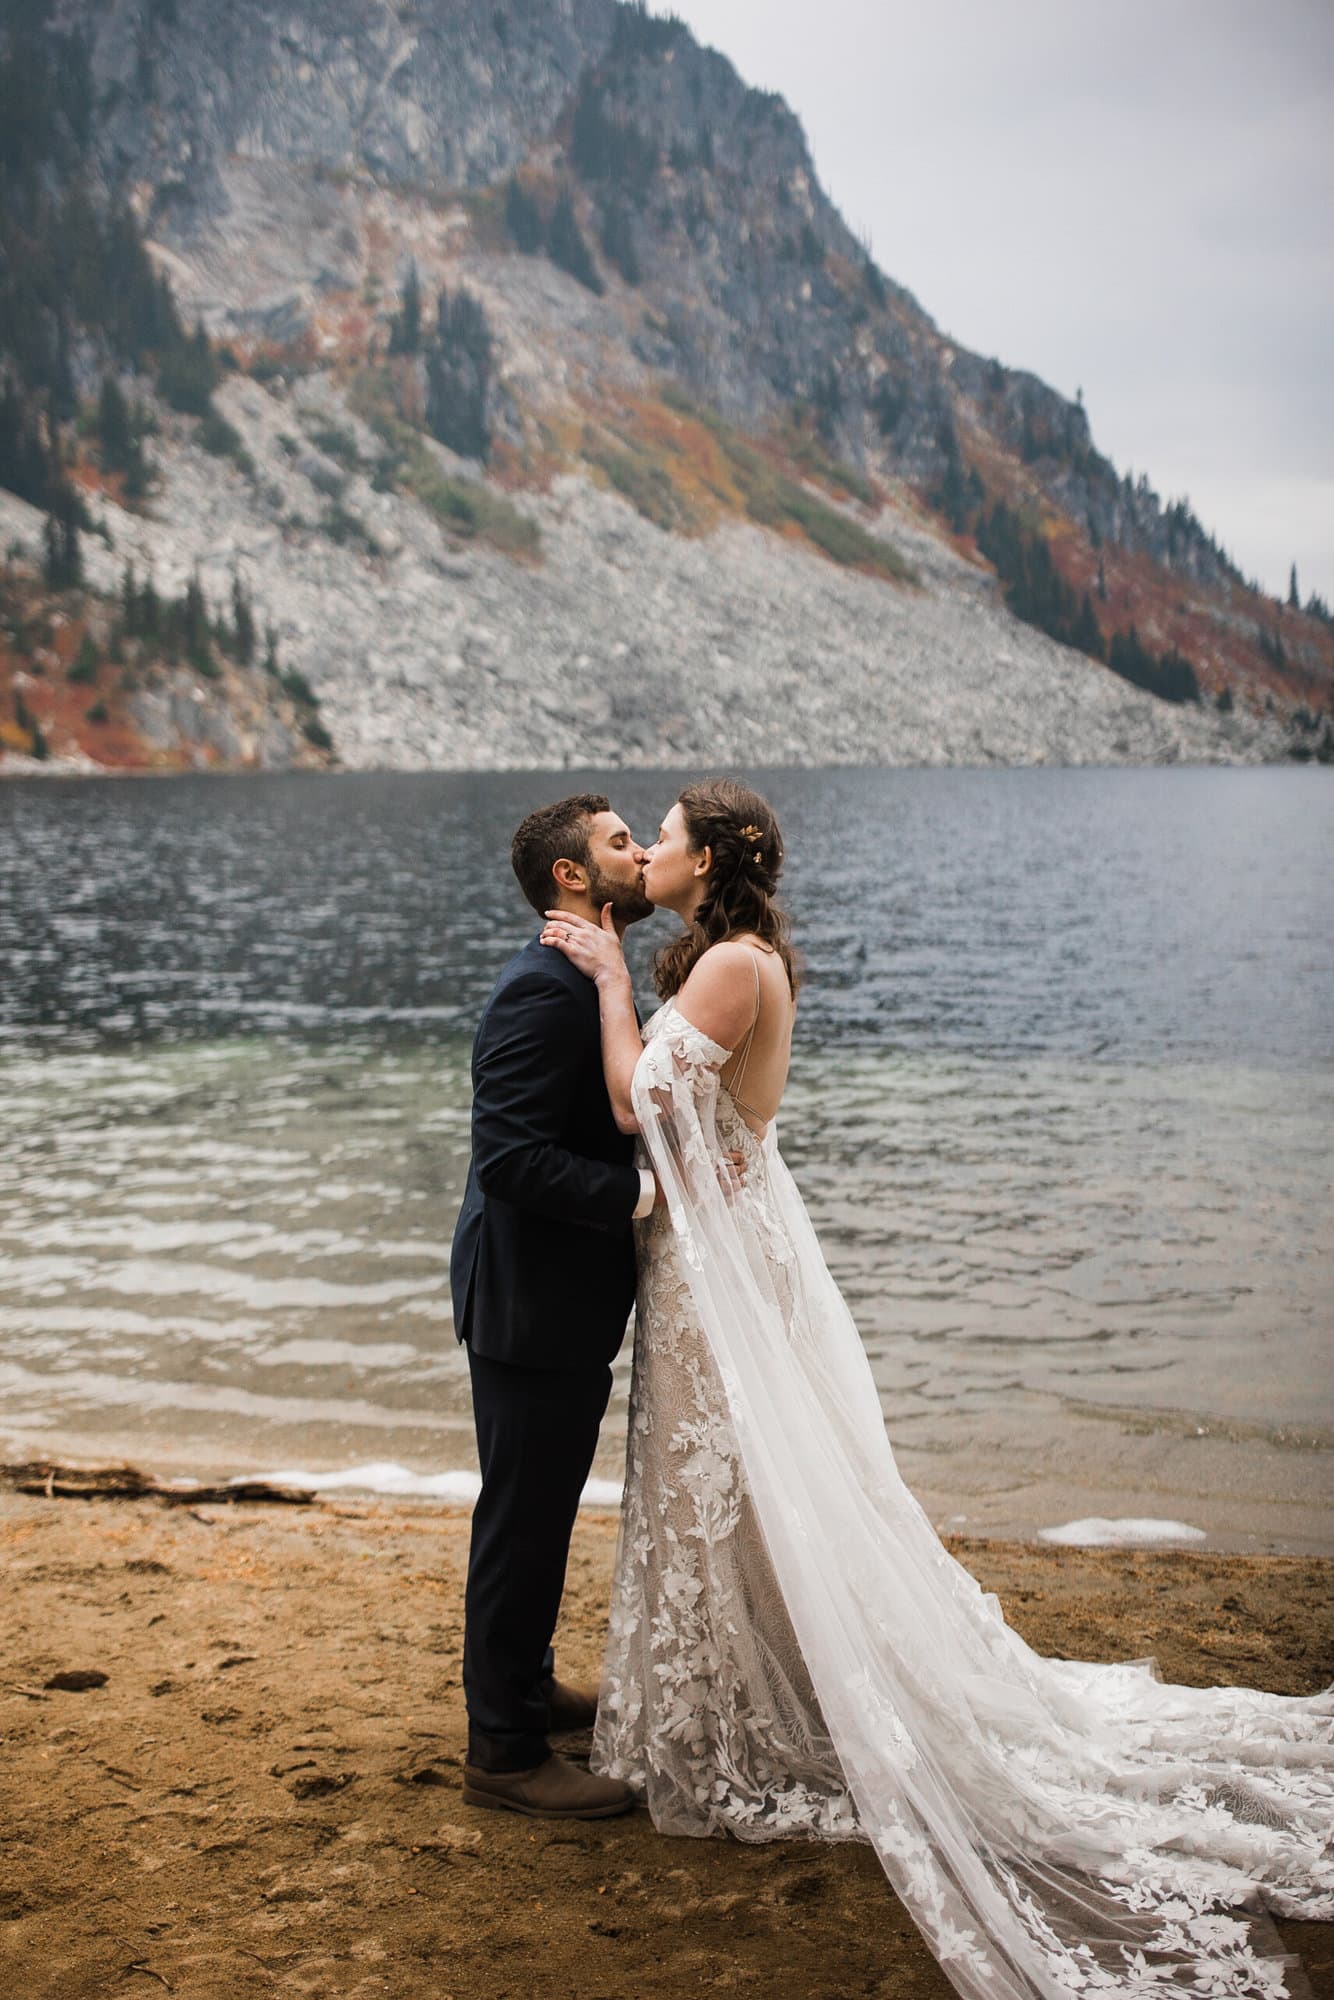 Nothing-not fires, smoke, or rain- would stop this pair of park rangers from getting married. Their Leavenworth hiking elopement really was one for the books